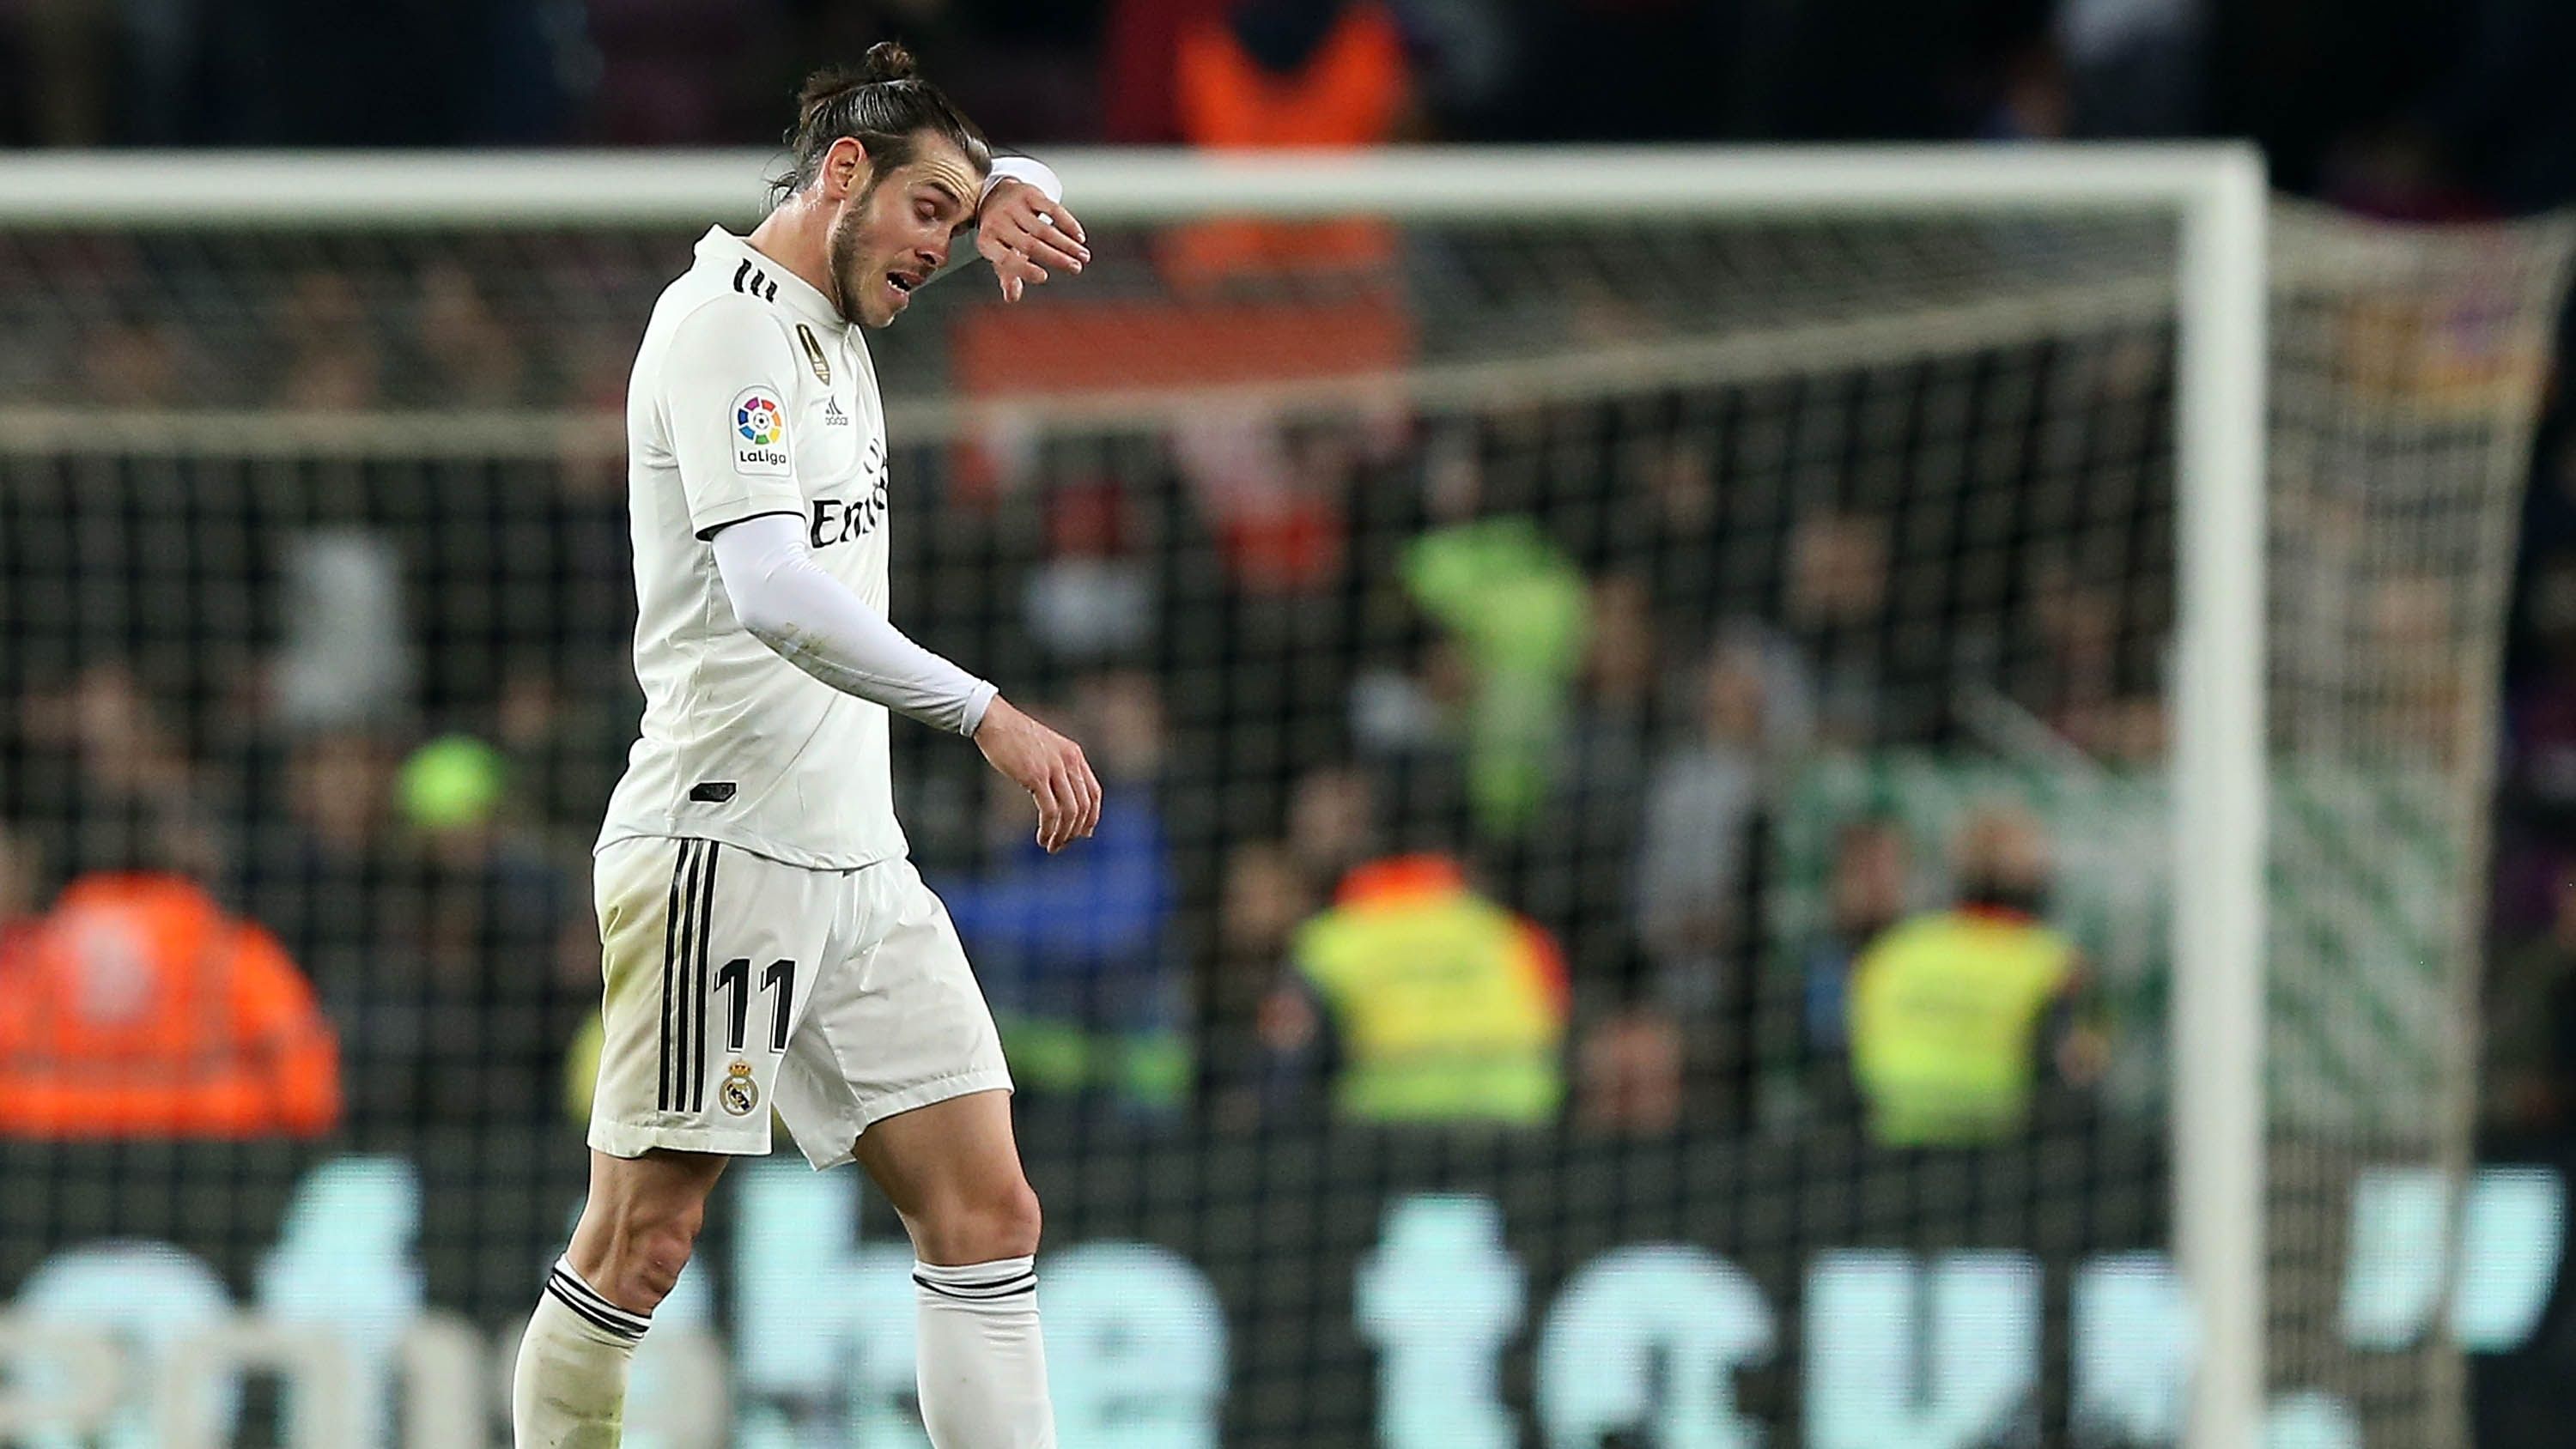 Gareth Bale completes 250 appearances for Spanish club Real Madrid